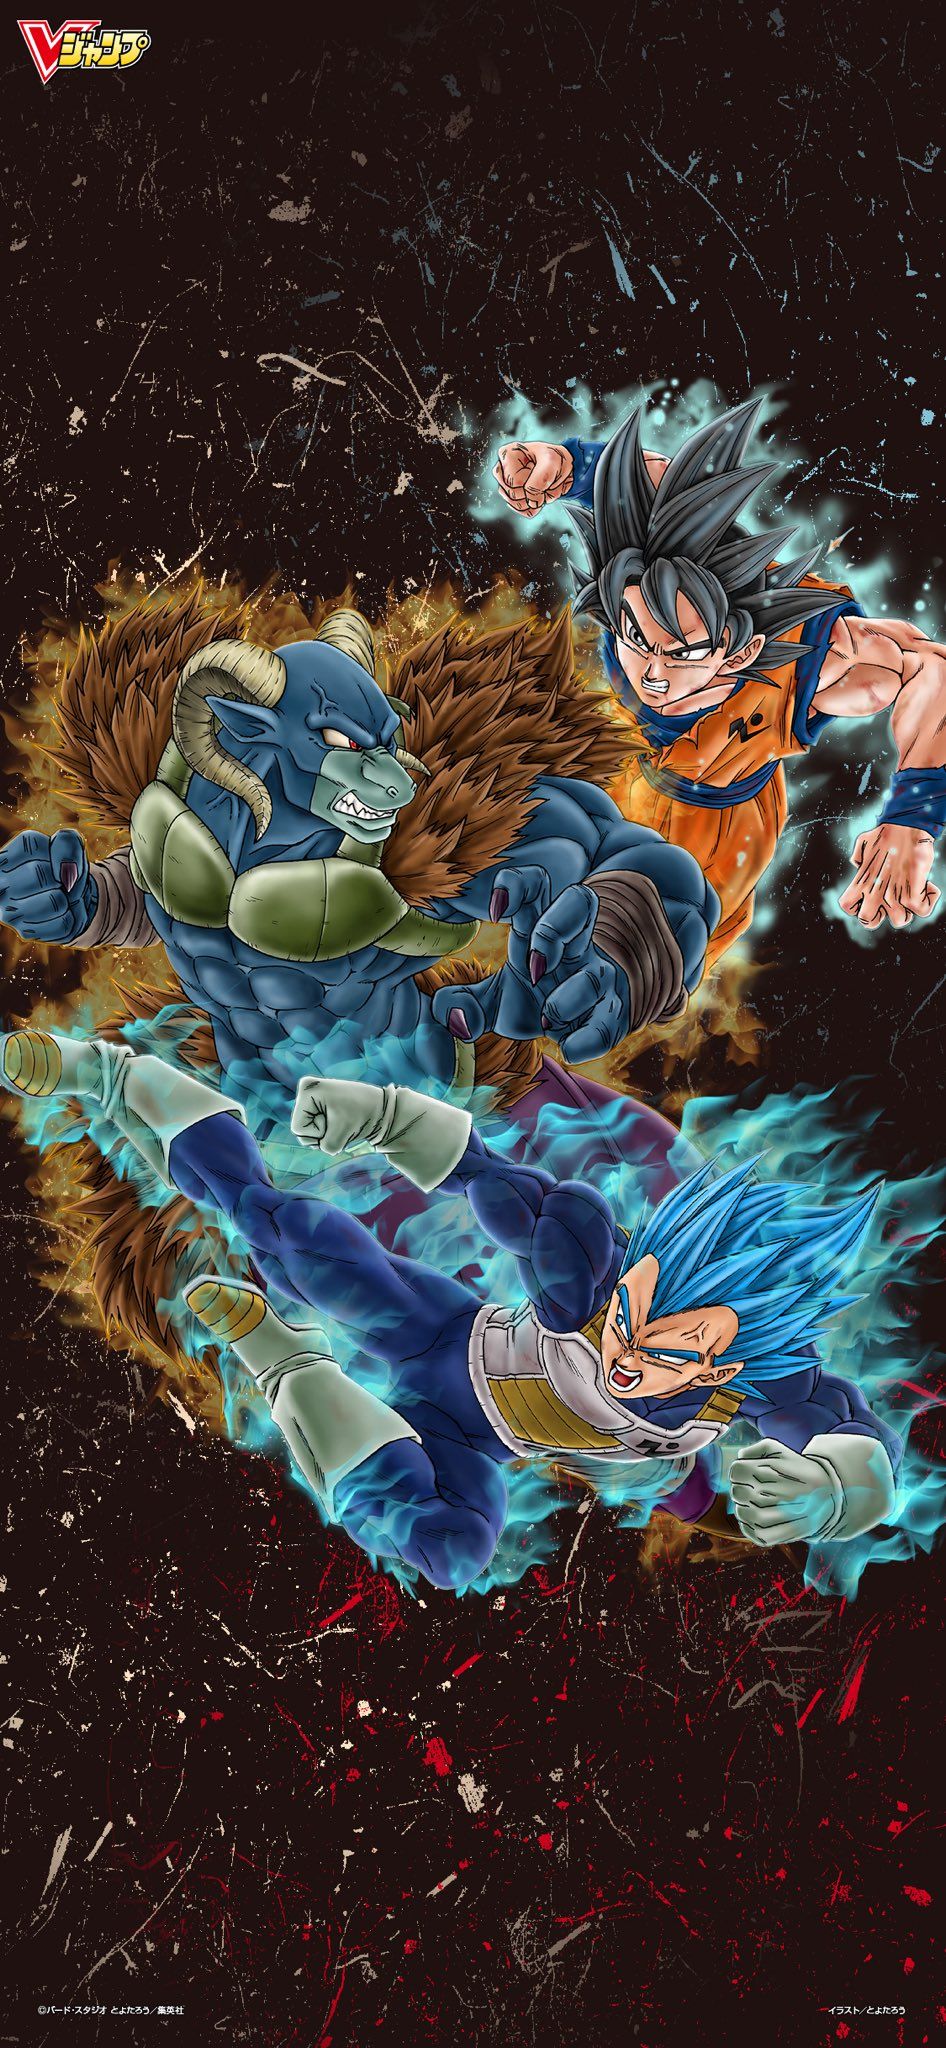 Dragon Ball Hype. Ball Super: Goku & Vegeta vs Moro Beautiful Wallpaper from V Jump. Download from the official site